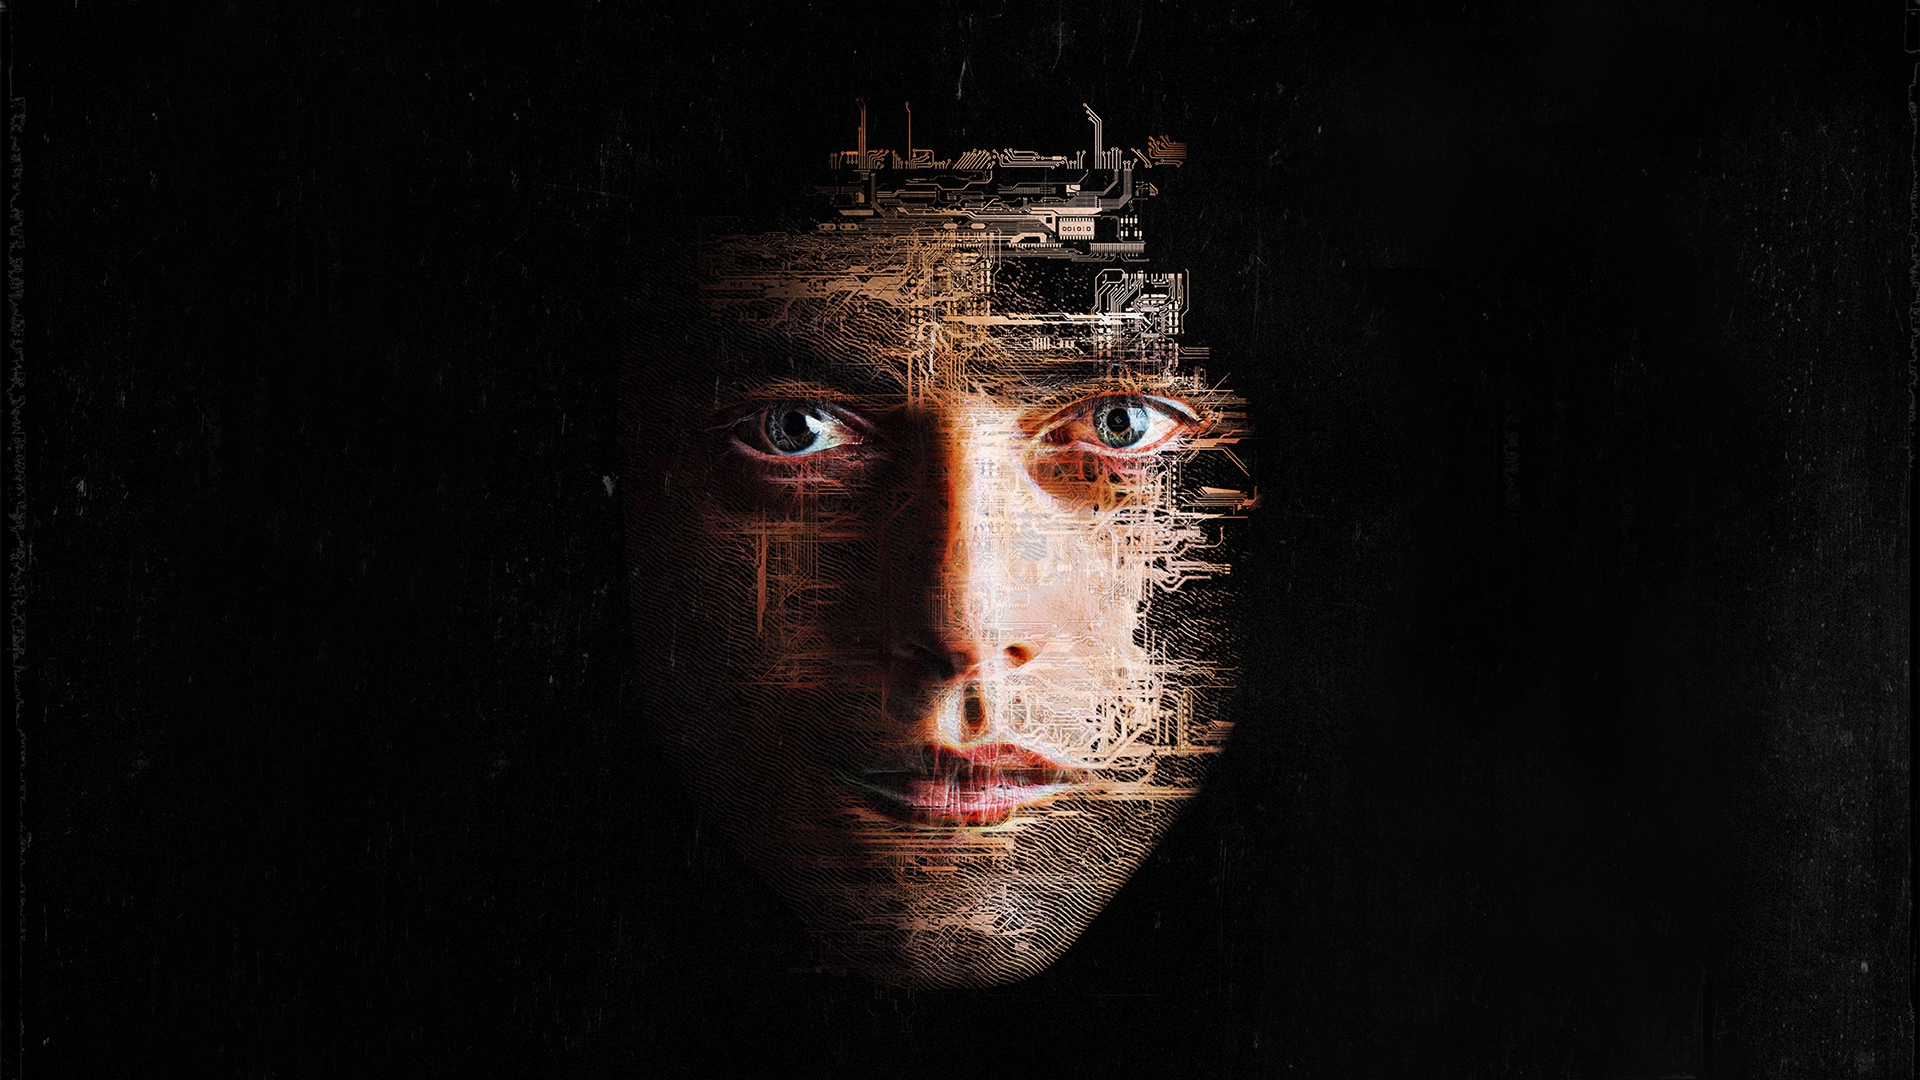 #tv series, #black background, #Mr. Robot, #circuits, #face